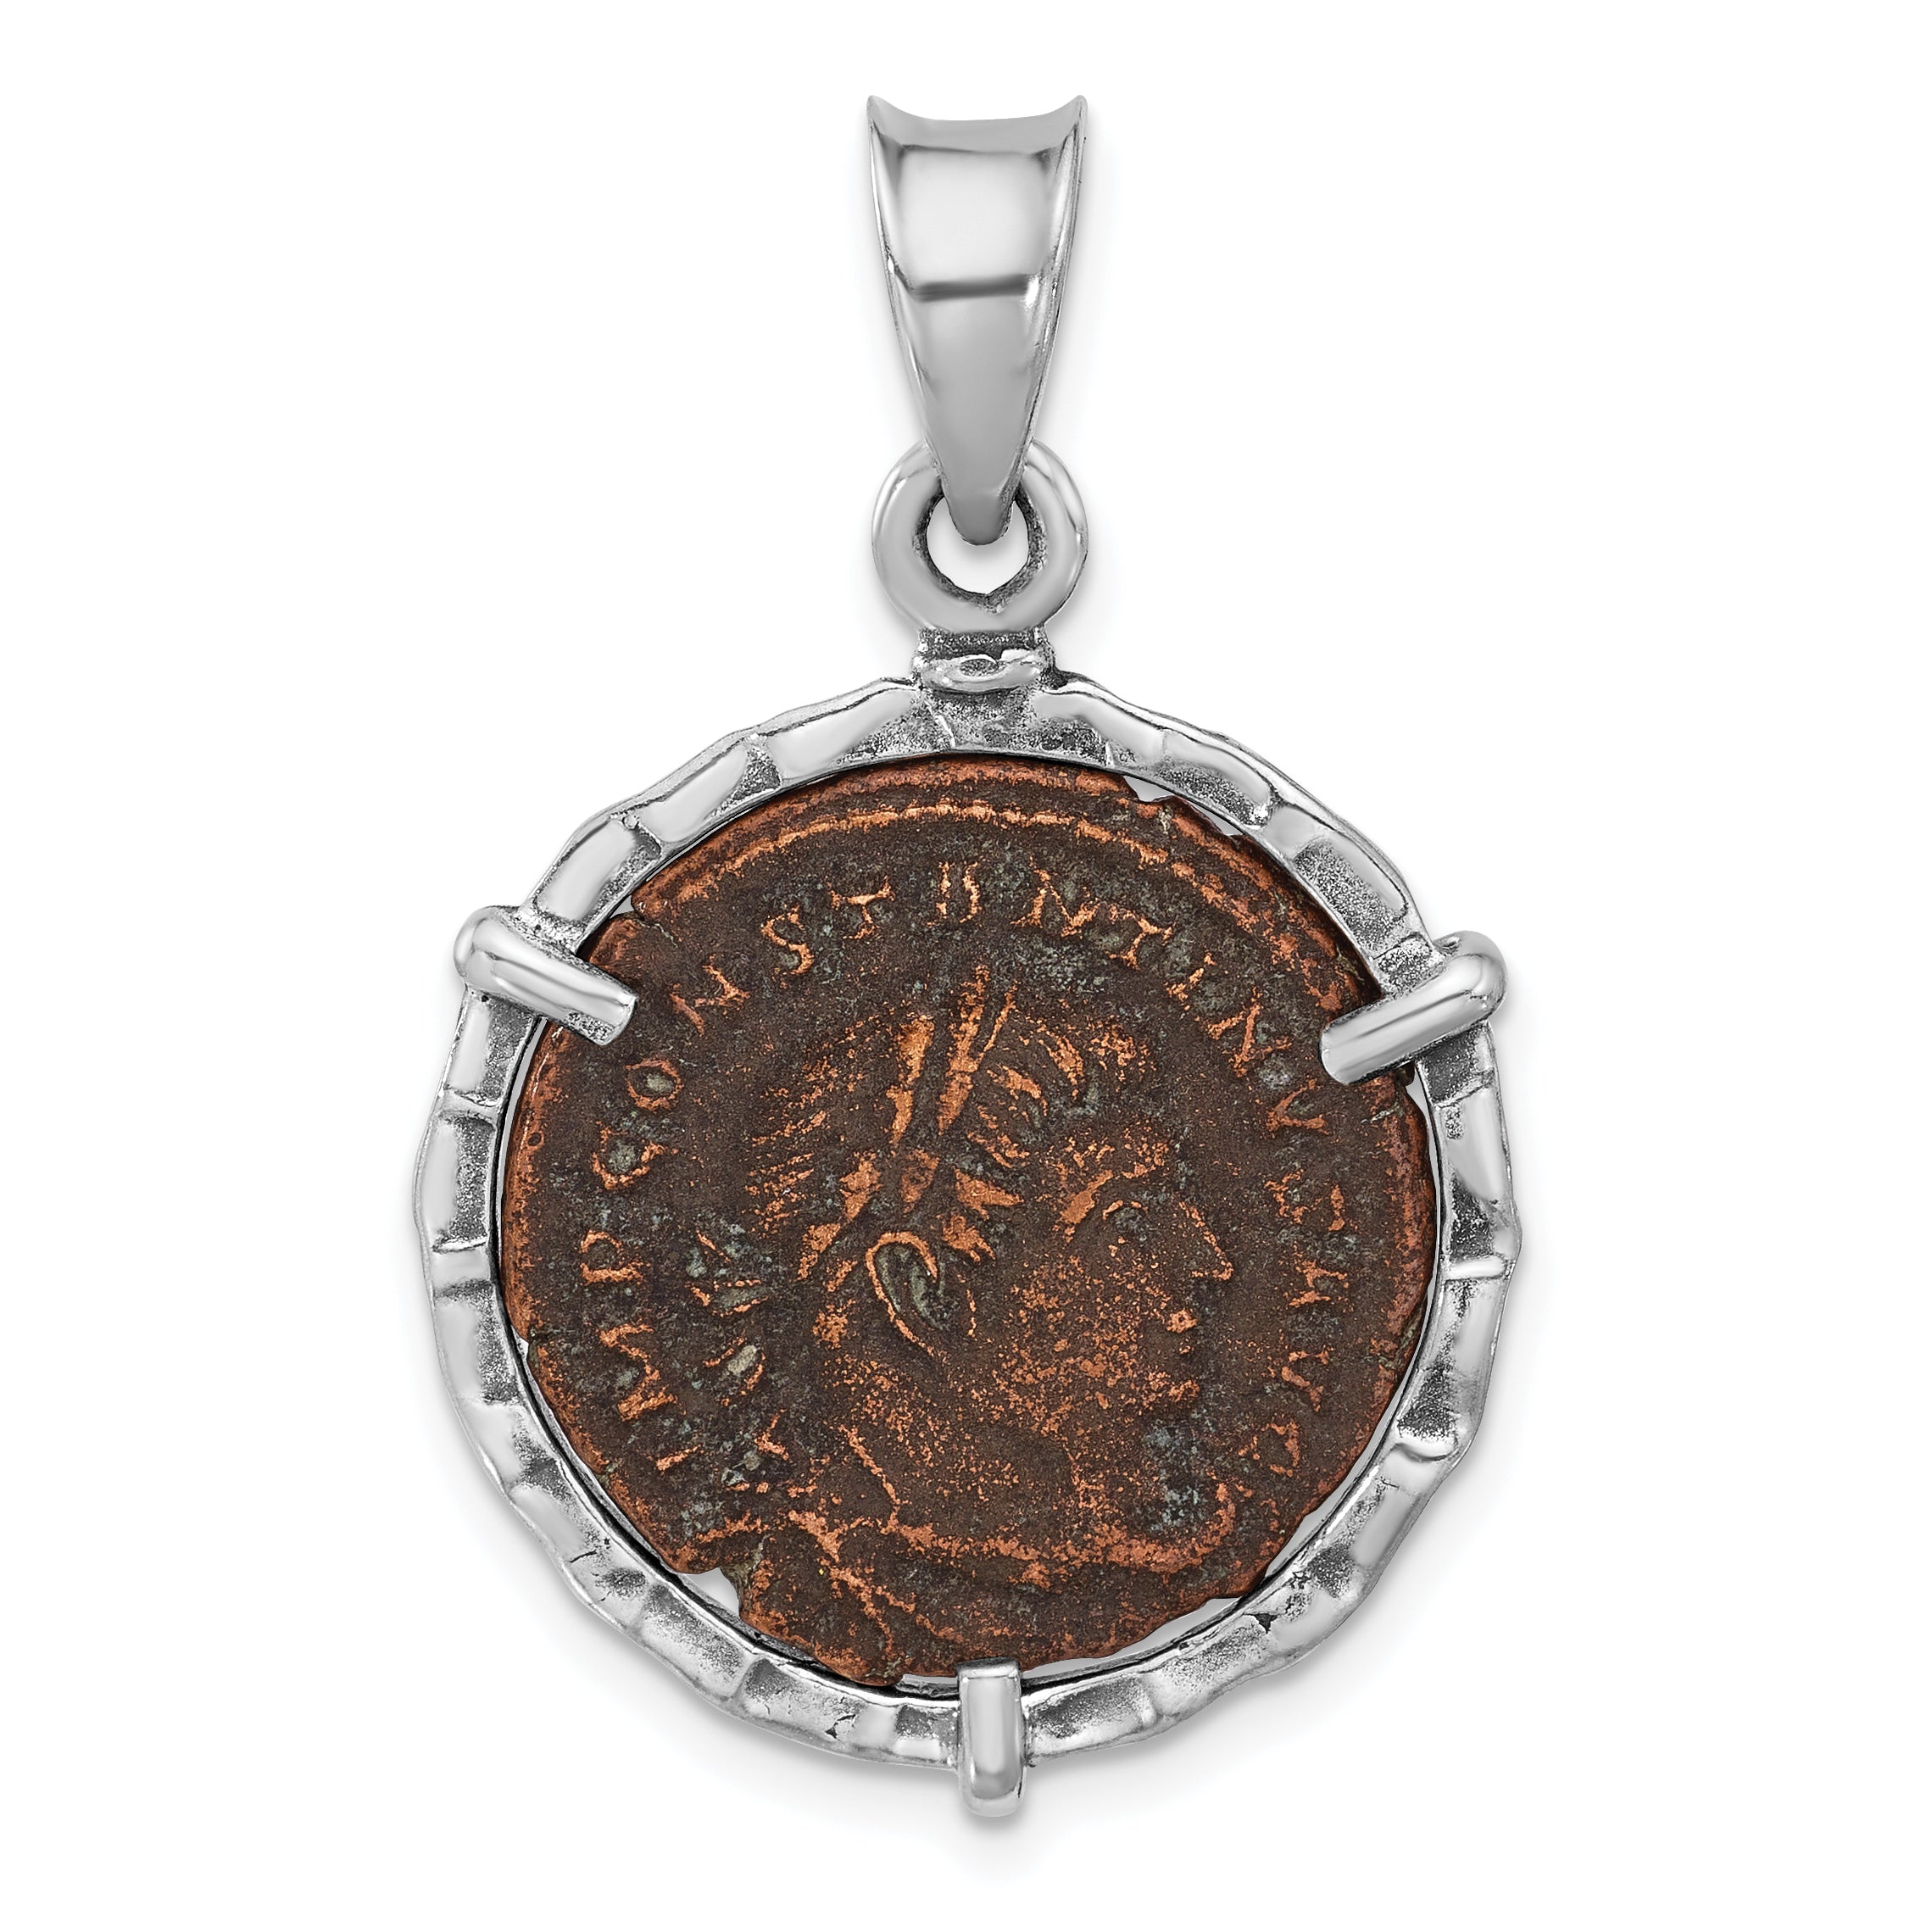 Ancient Coins Sterling Silver and Bronze Antiqued Roman Constantine l Coin Pendant with a Certificate of Authenticity